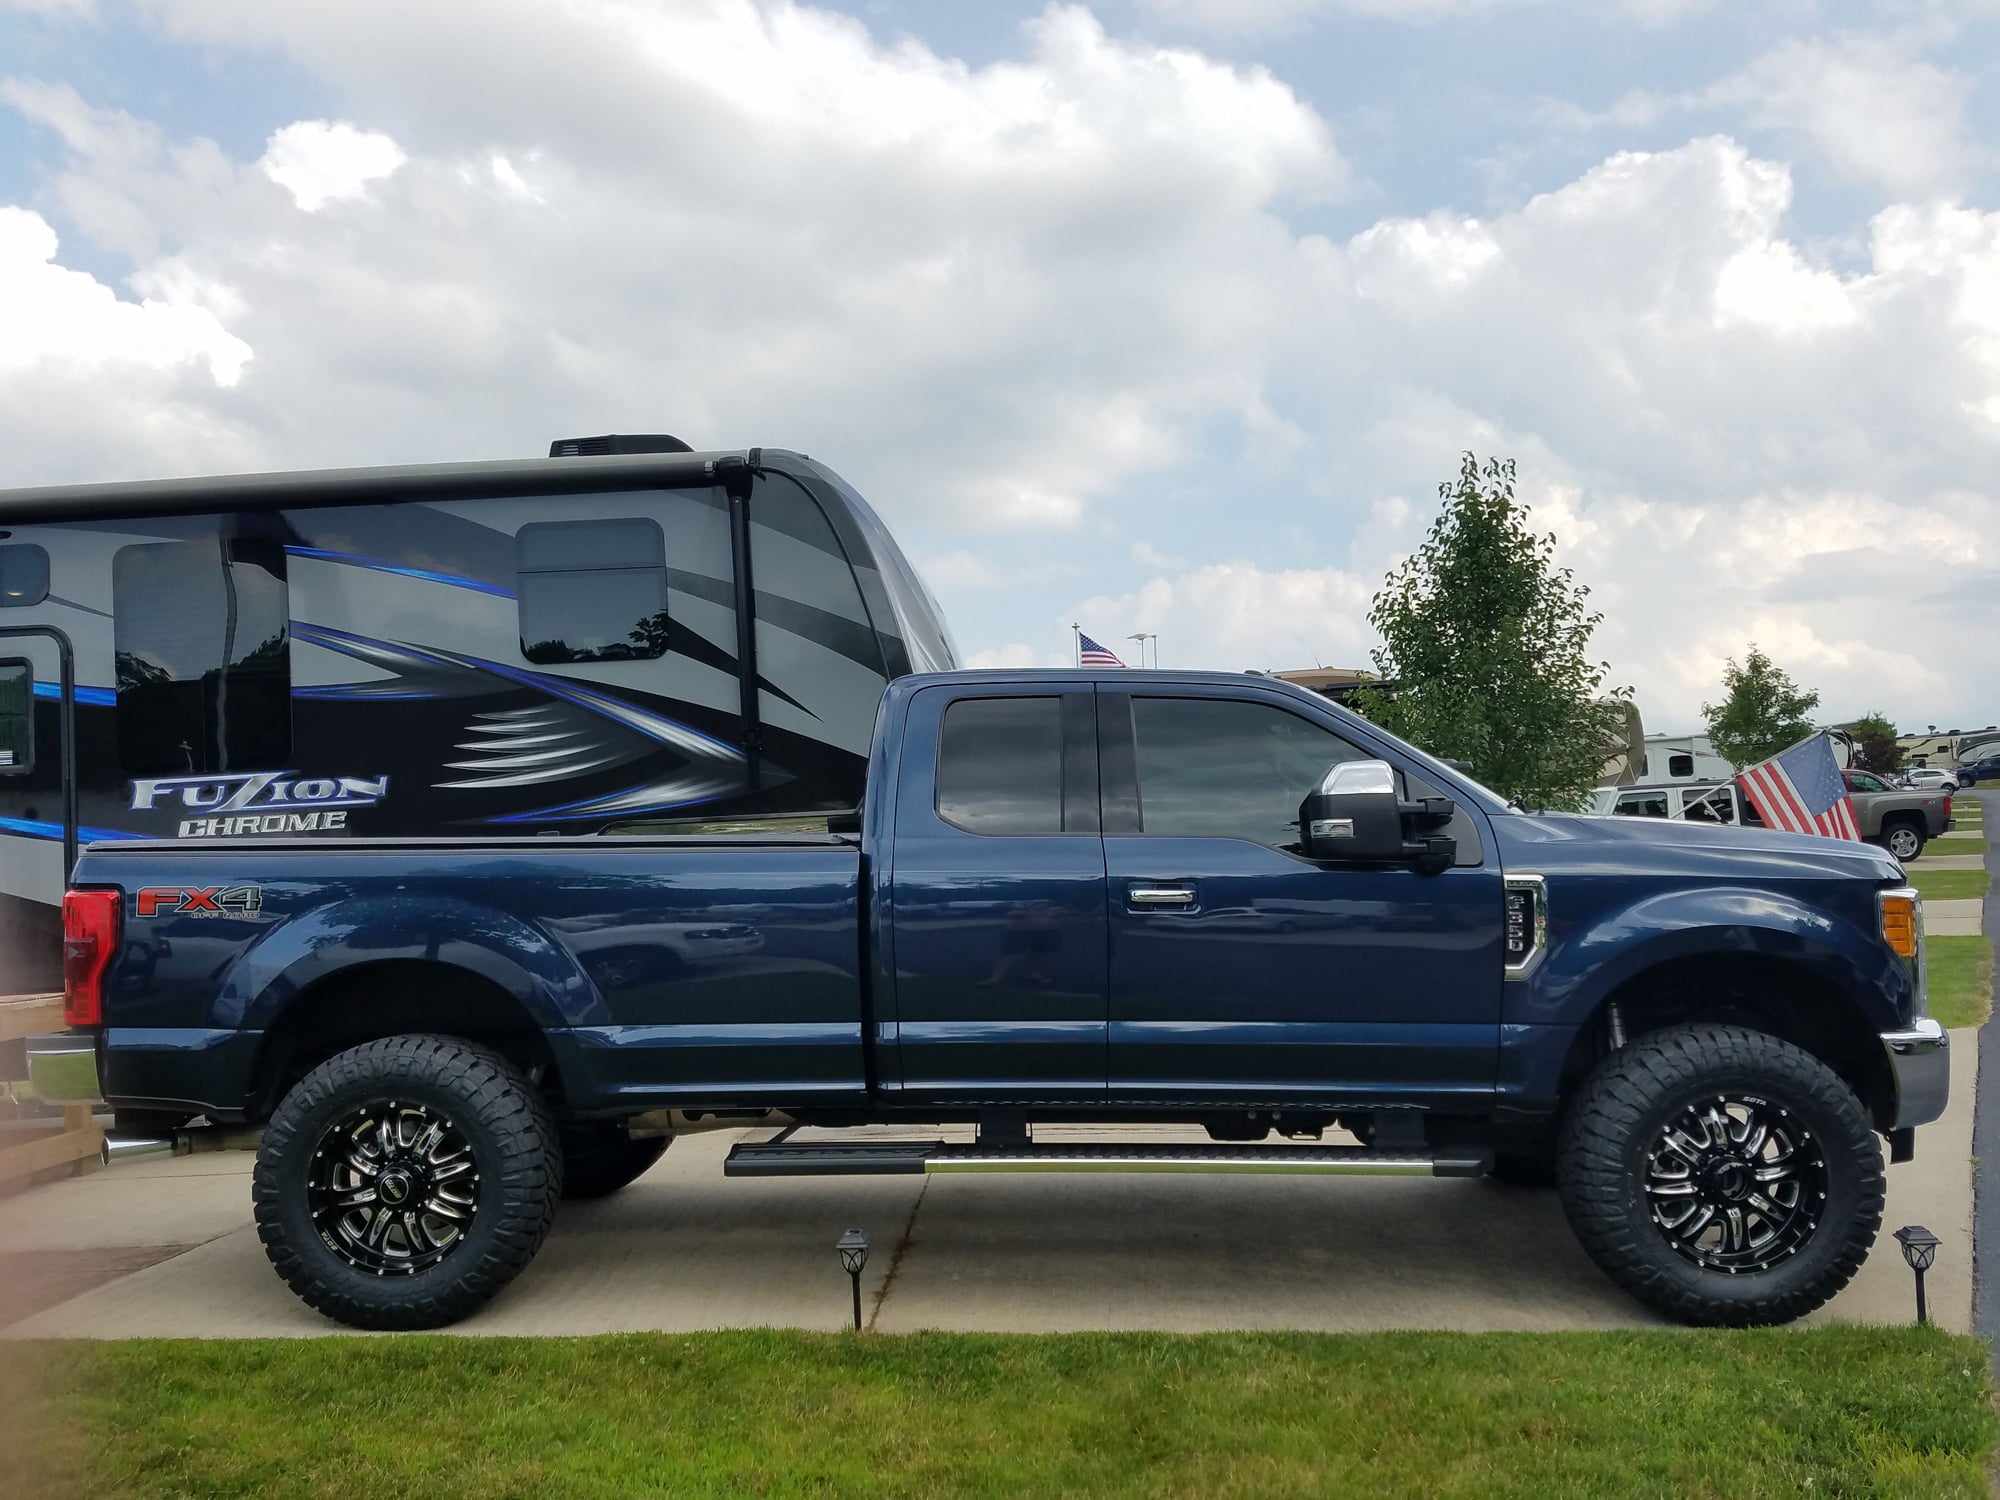 Wheels and Tires/Axles - SOTA rehab 20" wheels and Nitto 37x12.50 tire package - Used - 2011 to 2019 Ford F-250 Super Duty - 2011 to 2019 Ford F-350 Super Duty - Livonia, MI 48150, United States